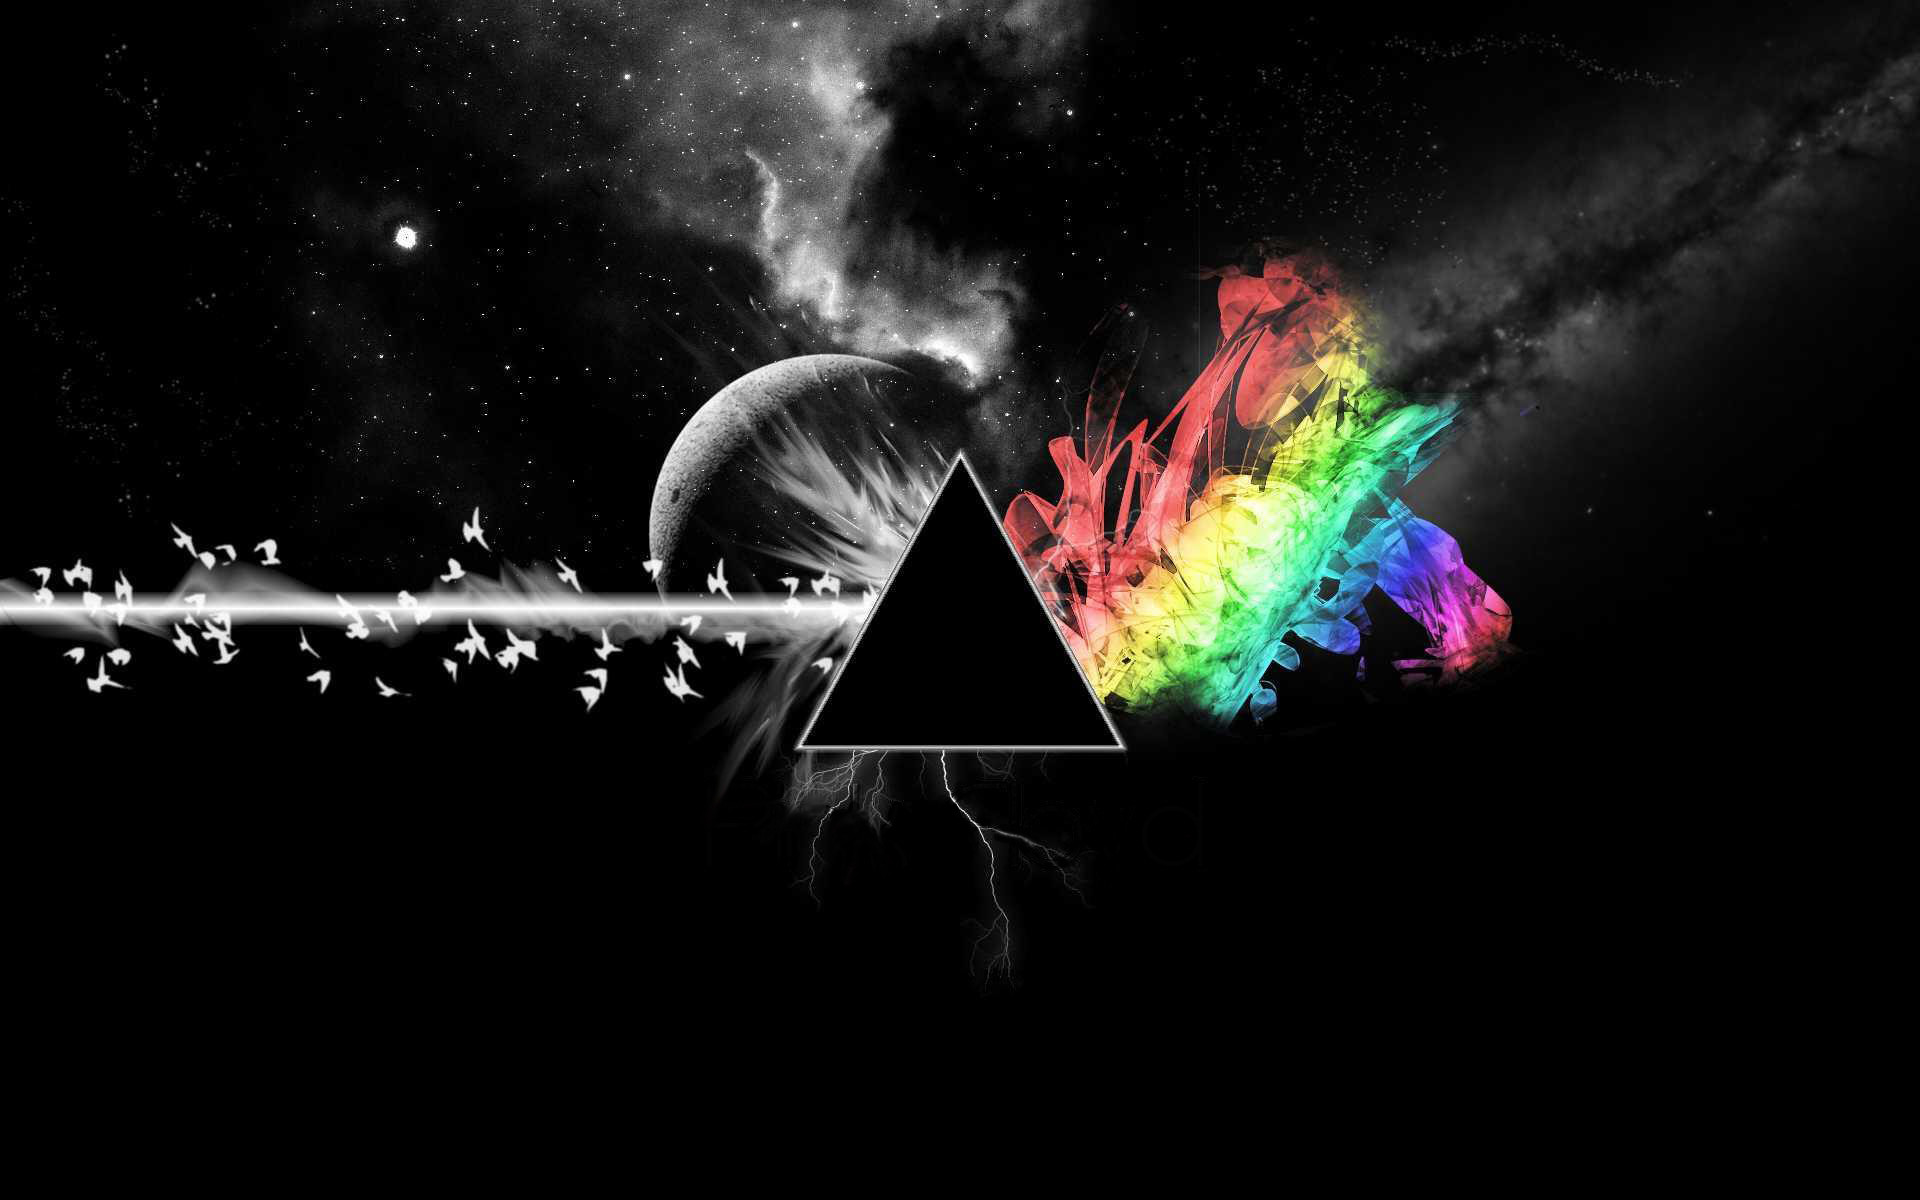 Download HQ The Dark Side of the Moon Science Fiction (Sci-fi) wallpaper / 1920x1200